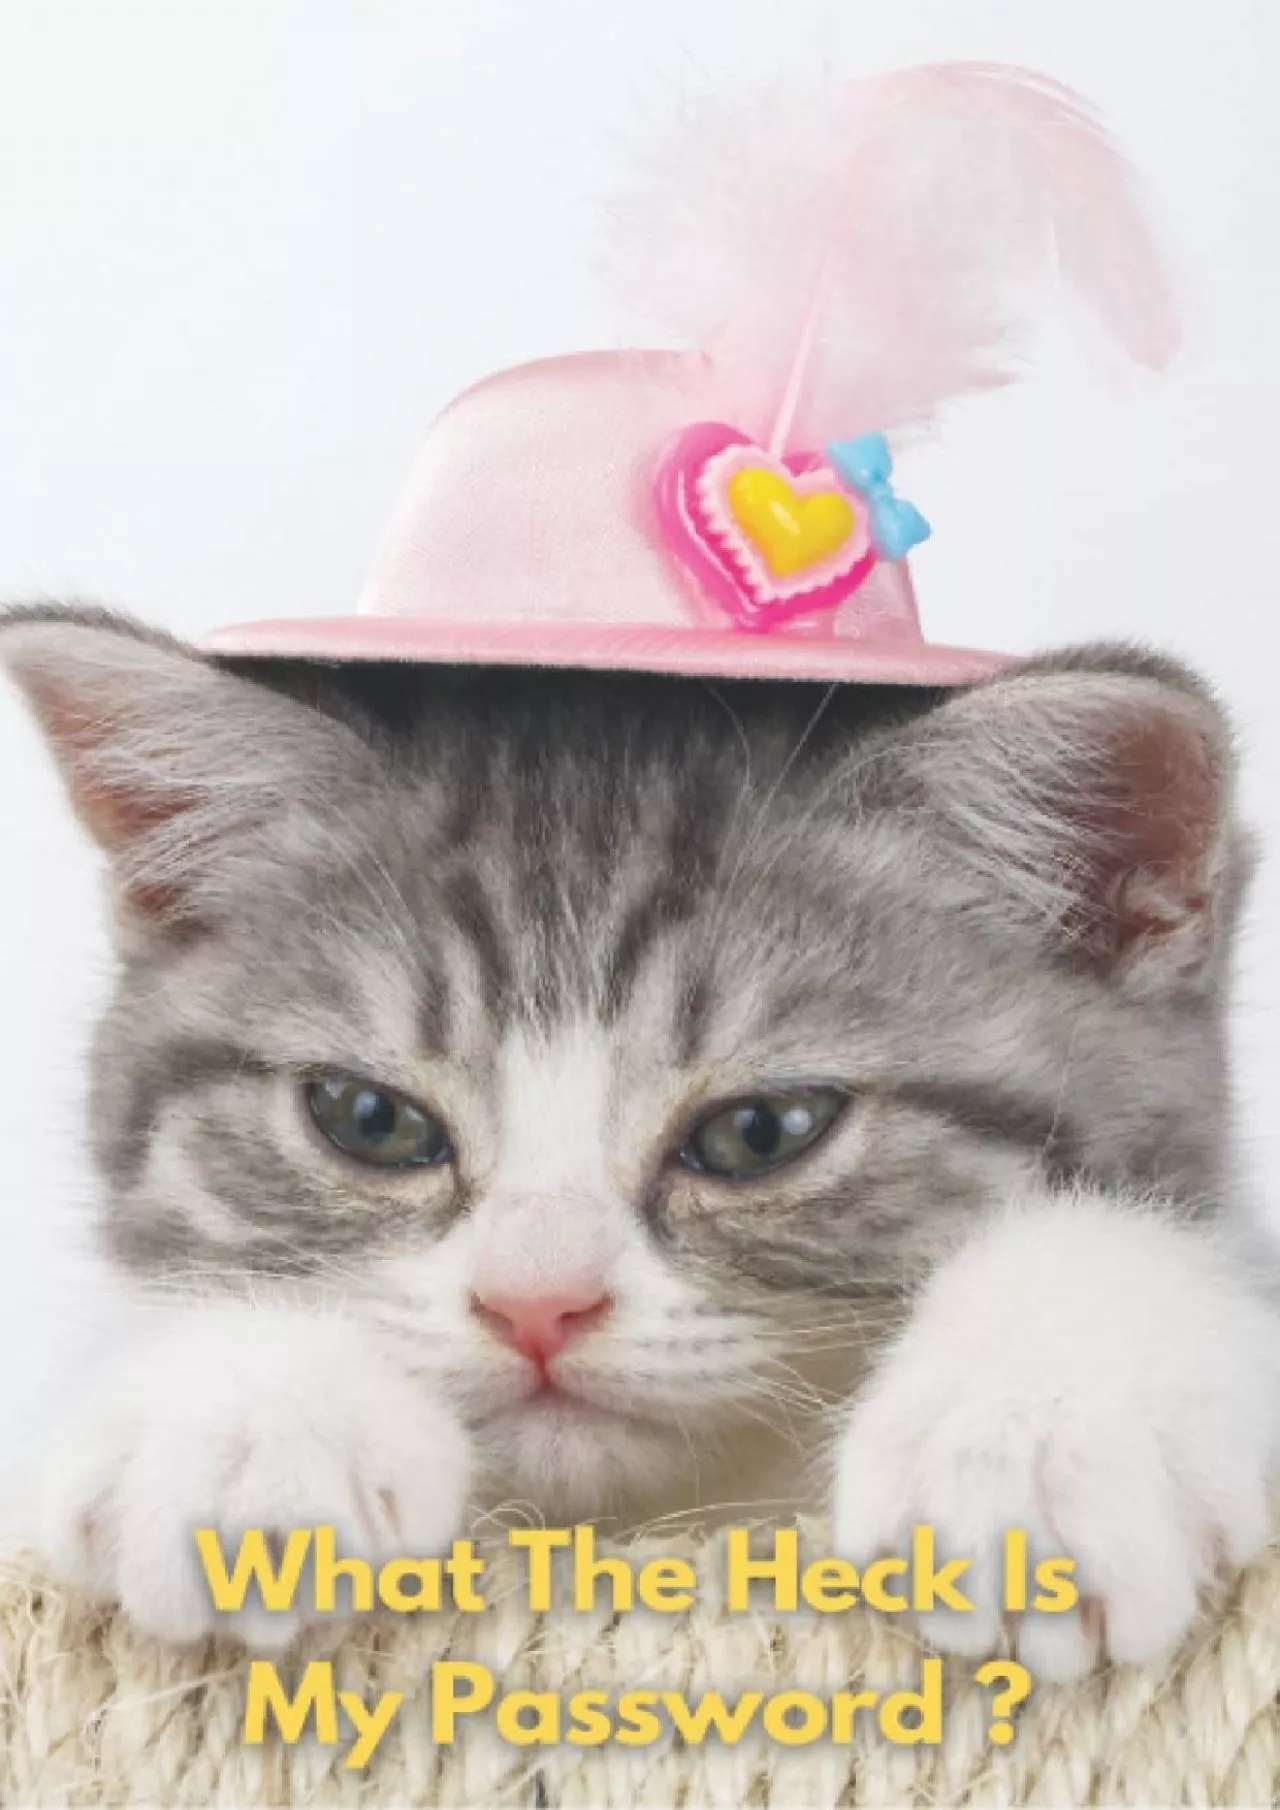 [DOWLOAD]-What The Heck Is My Password ?: Cute Kitten Password Book and Internet Password